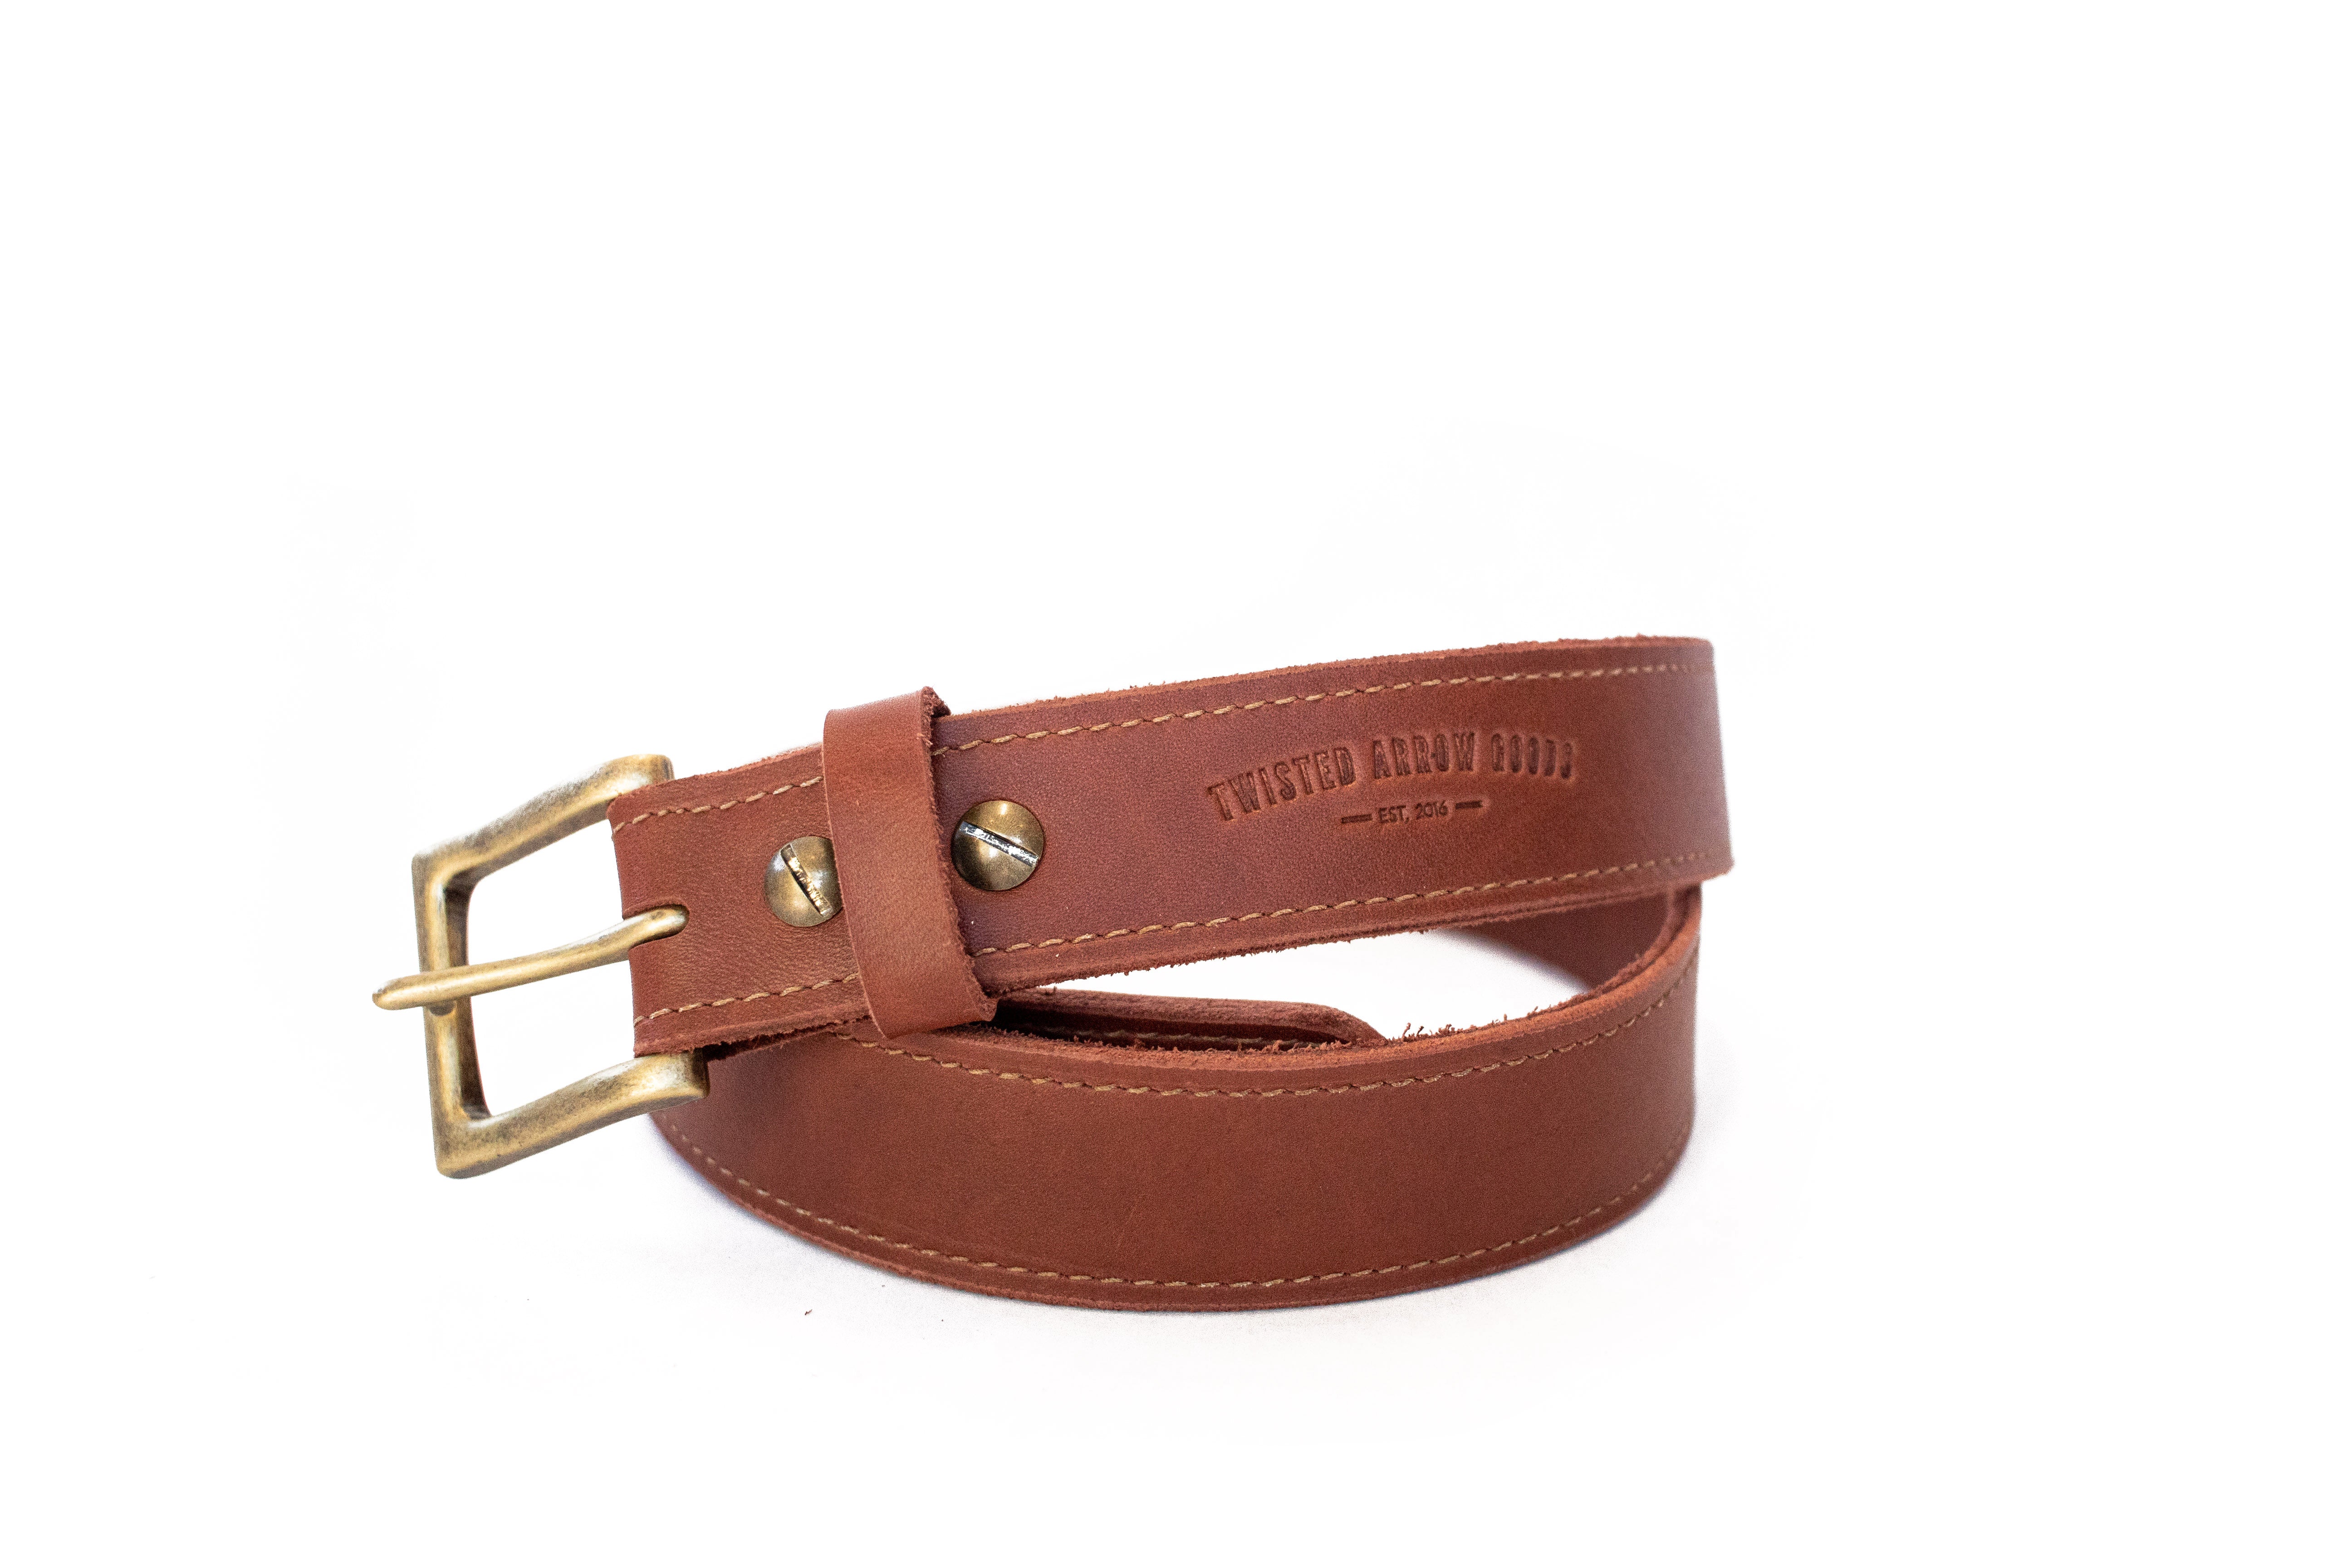 Tan Solid Belt Bags for Women with Striped Strap